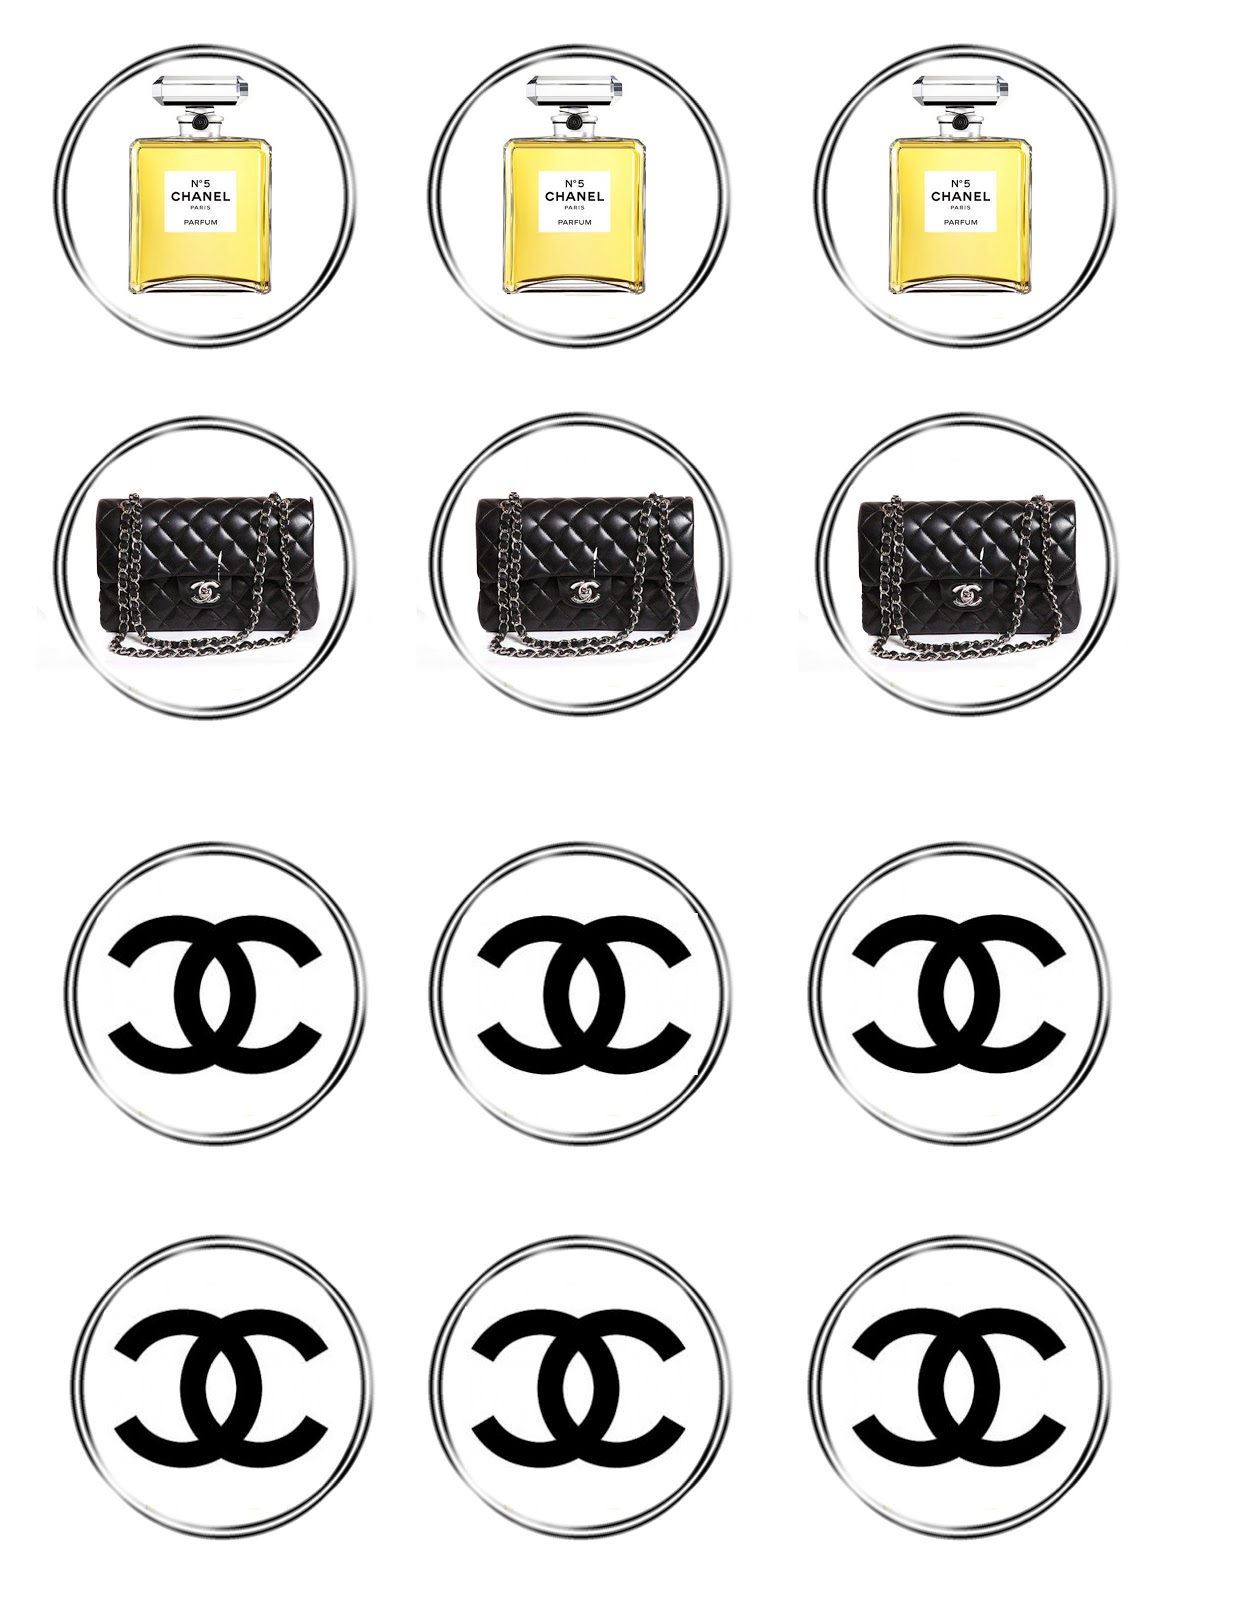 Daisy Celebrates: Free Chanel cupcake topper and wrapper files